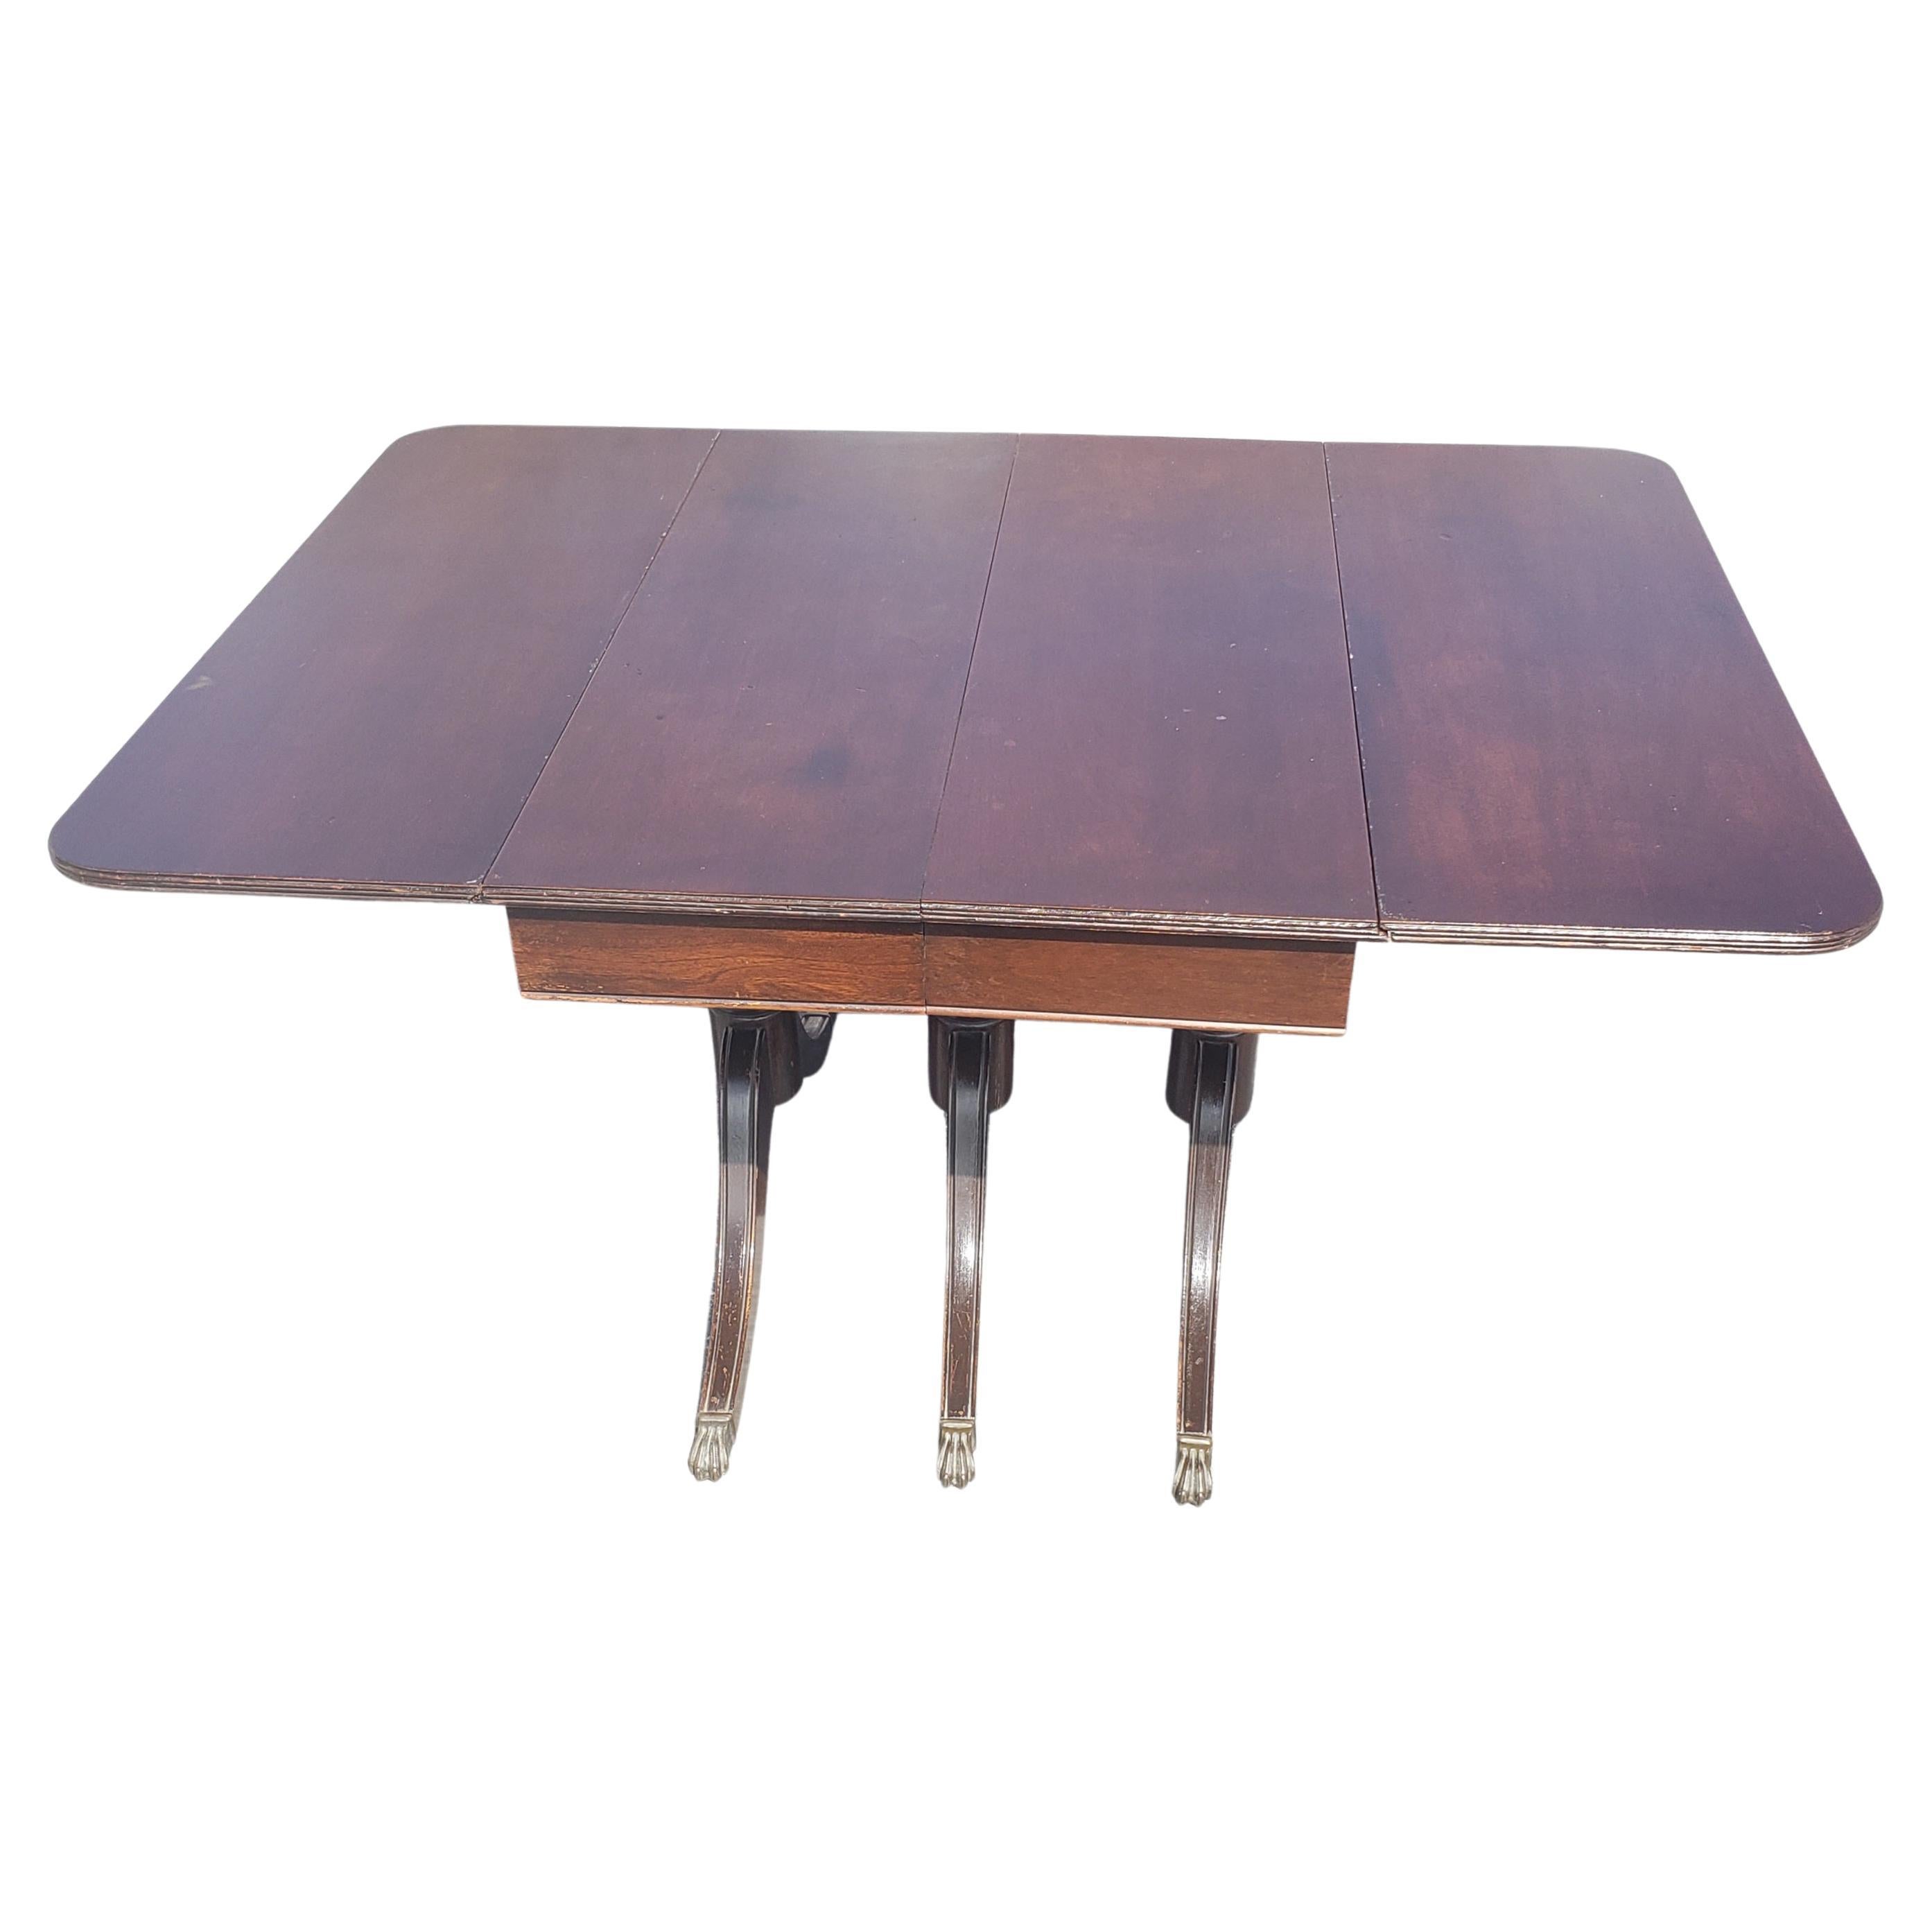 20th Century Vintage Federal Style Triple Pedestal Drop-Leaf Dining Table, circa 1940s For Sale